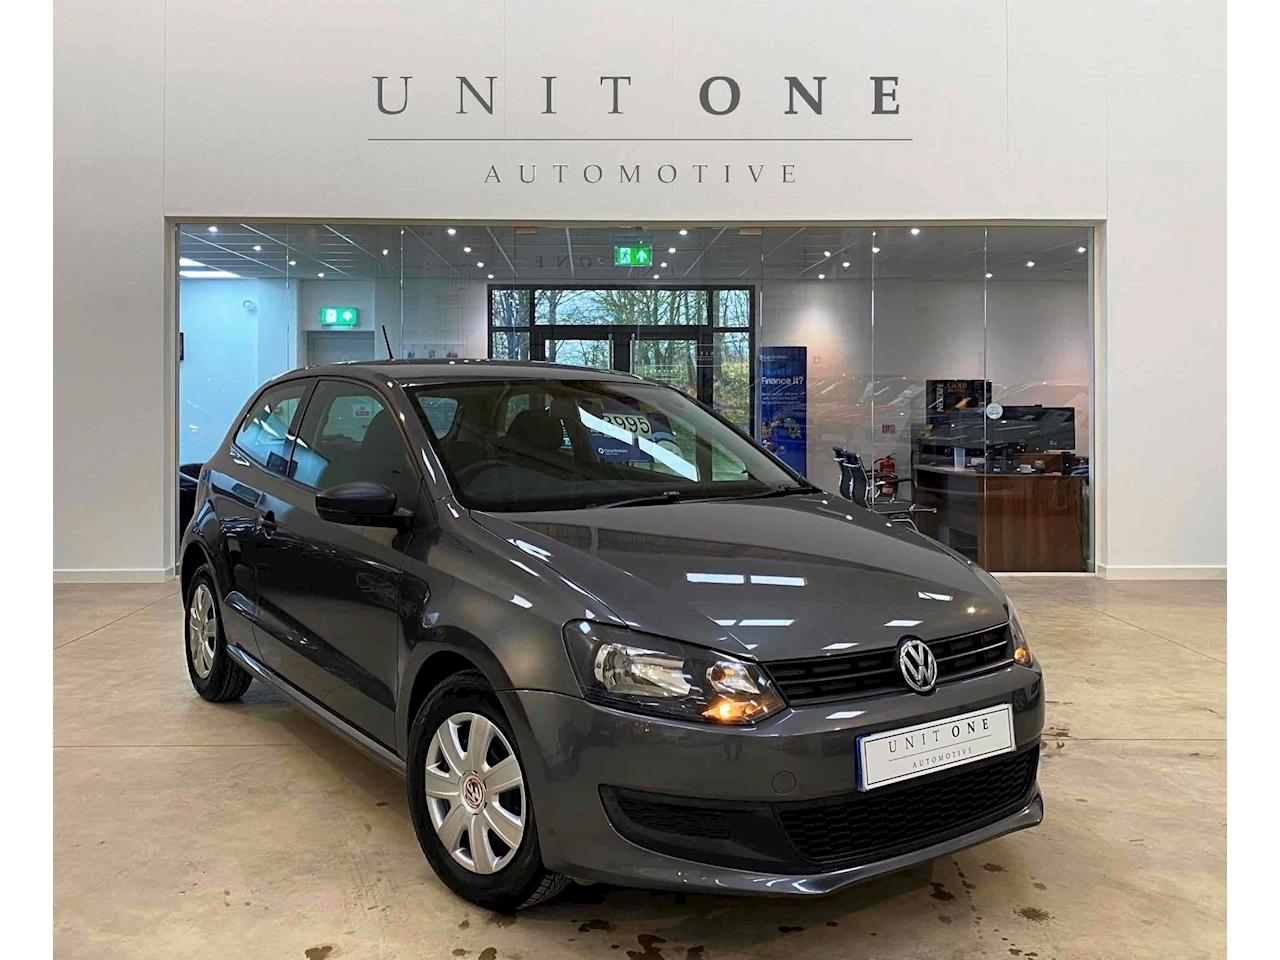 2012 Volkswagen Polo S 1.2 Manual Petrol For Sale in West Sussex Unit One Ltd